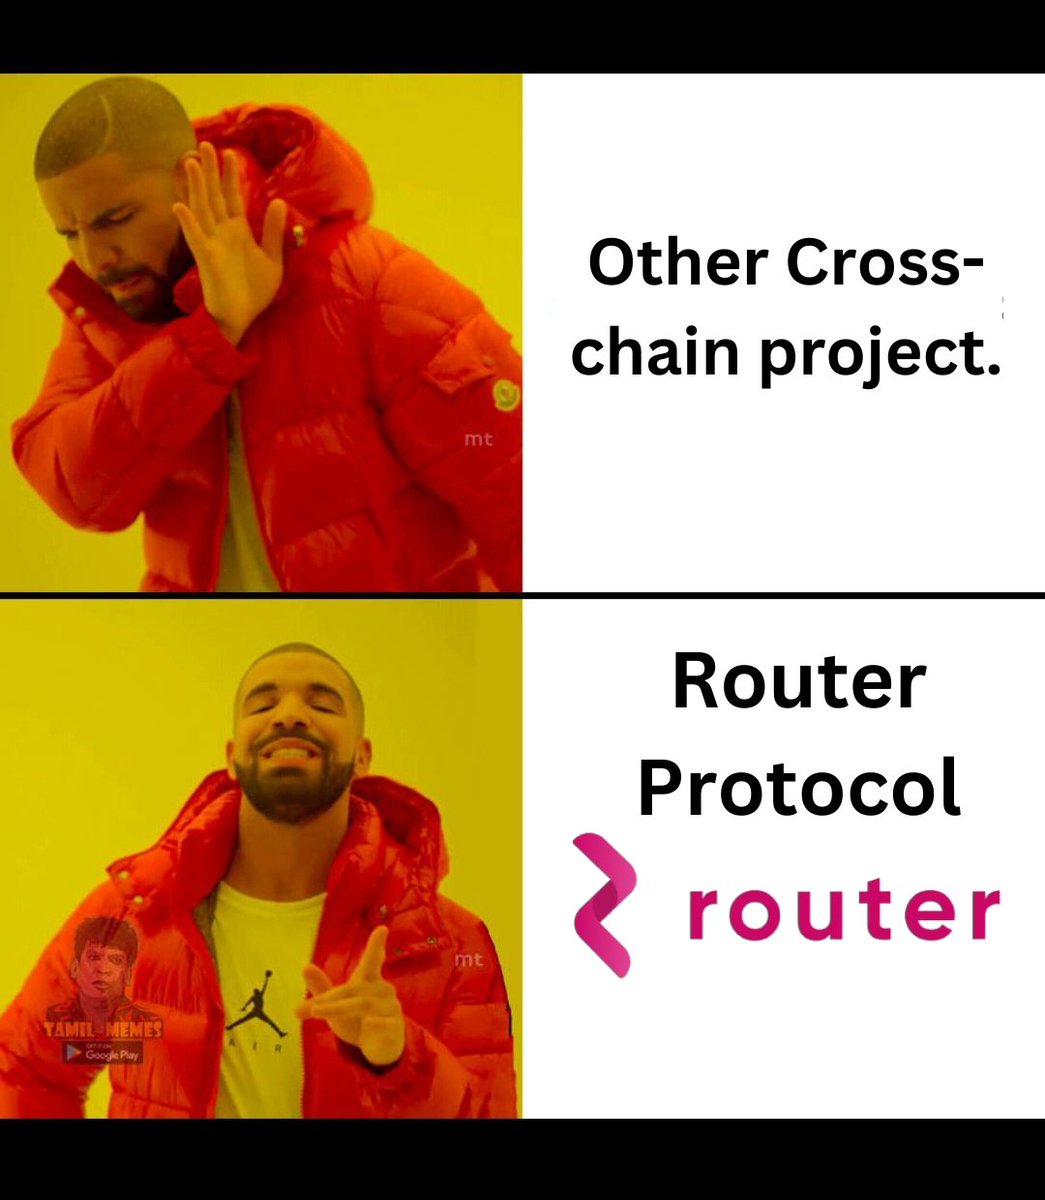 One great thing about @routerprotocol is its ability to incorporate different chains in its framework. Users can swap assets, send messages and build IDAPPS across multiple chains. Check out #RouterProtocol Today! 🌐: routerprotocol.com #cryptoassets #crypto